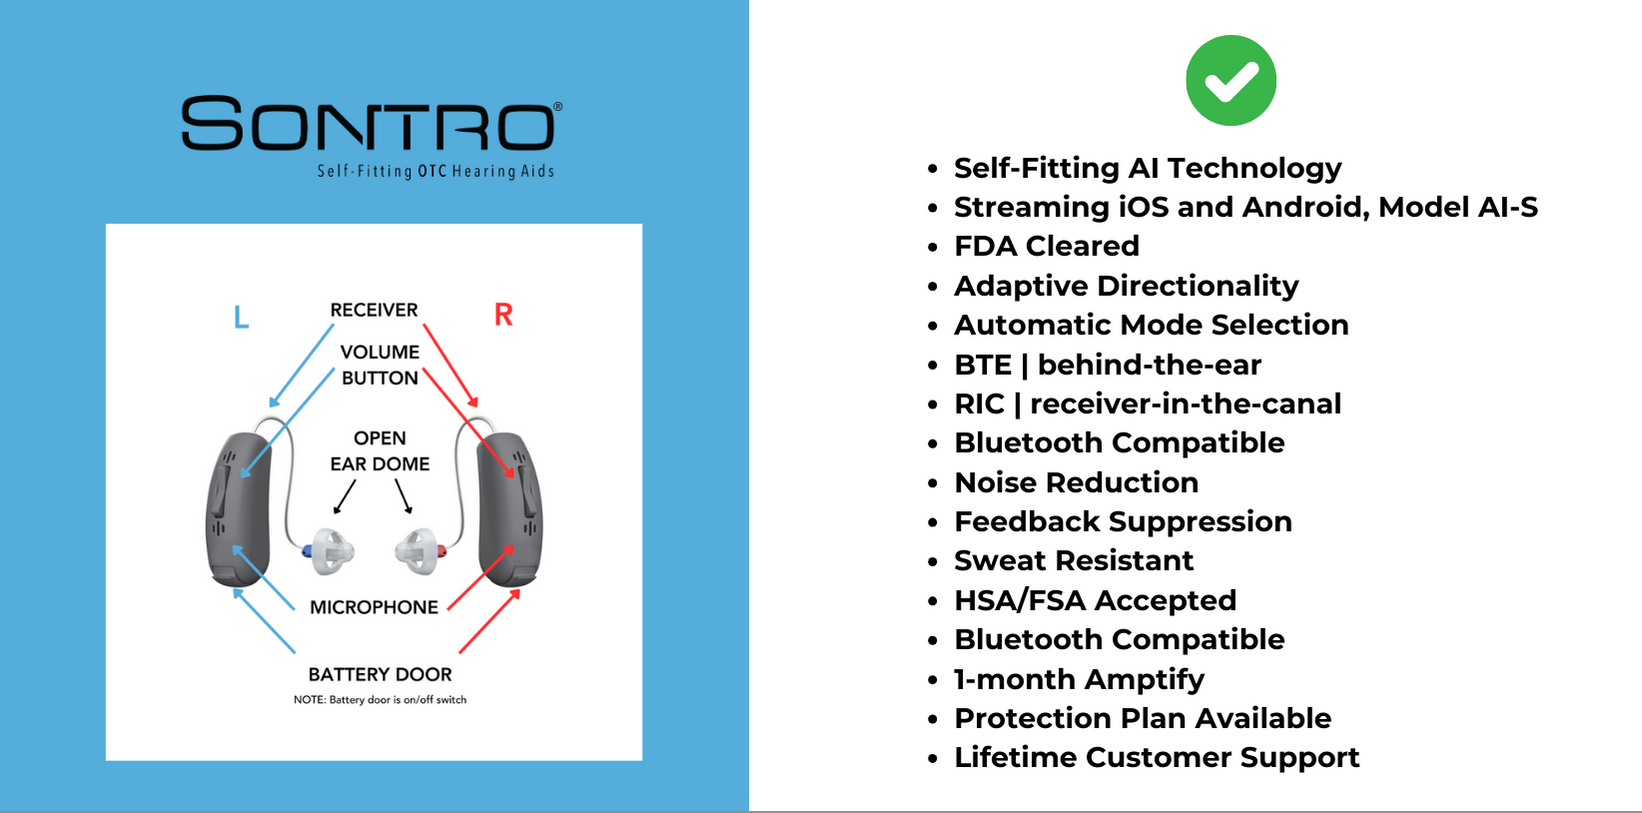 Sontro Self-Fitting OTC Hearing gAid Components and list of technology